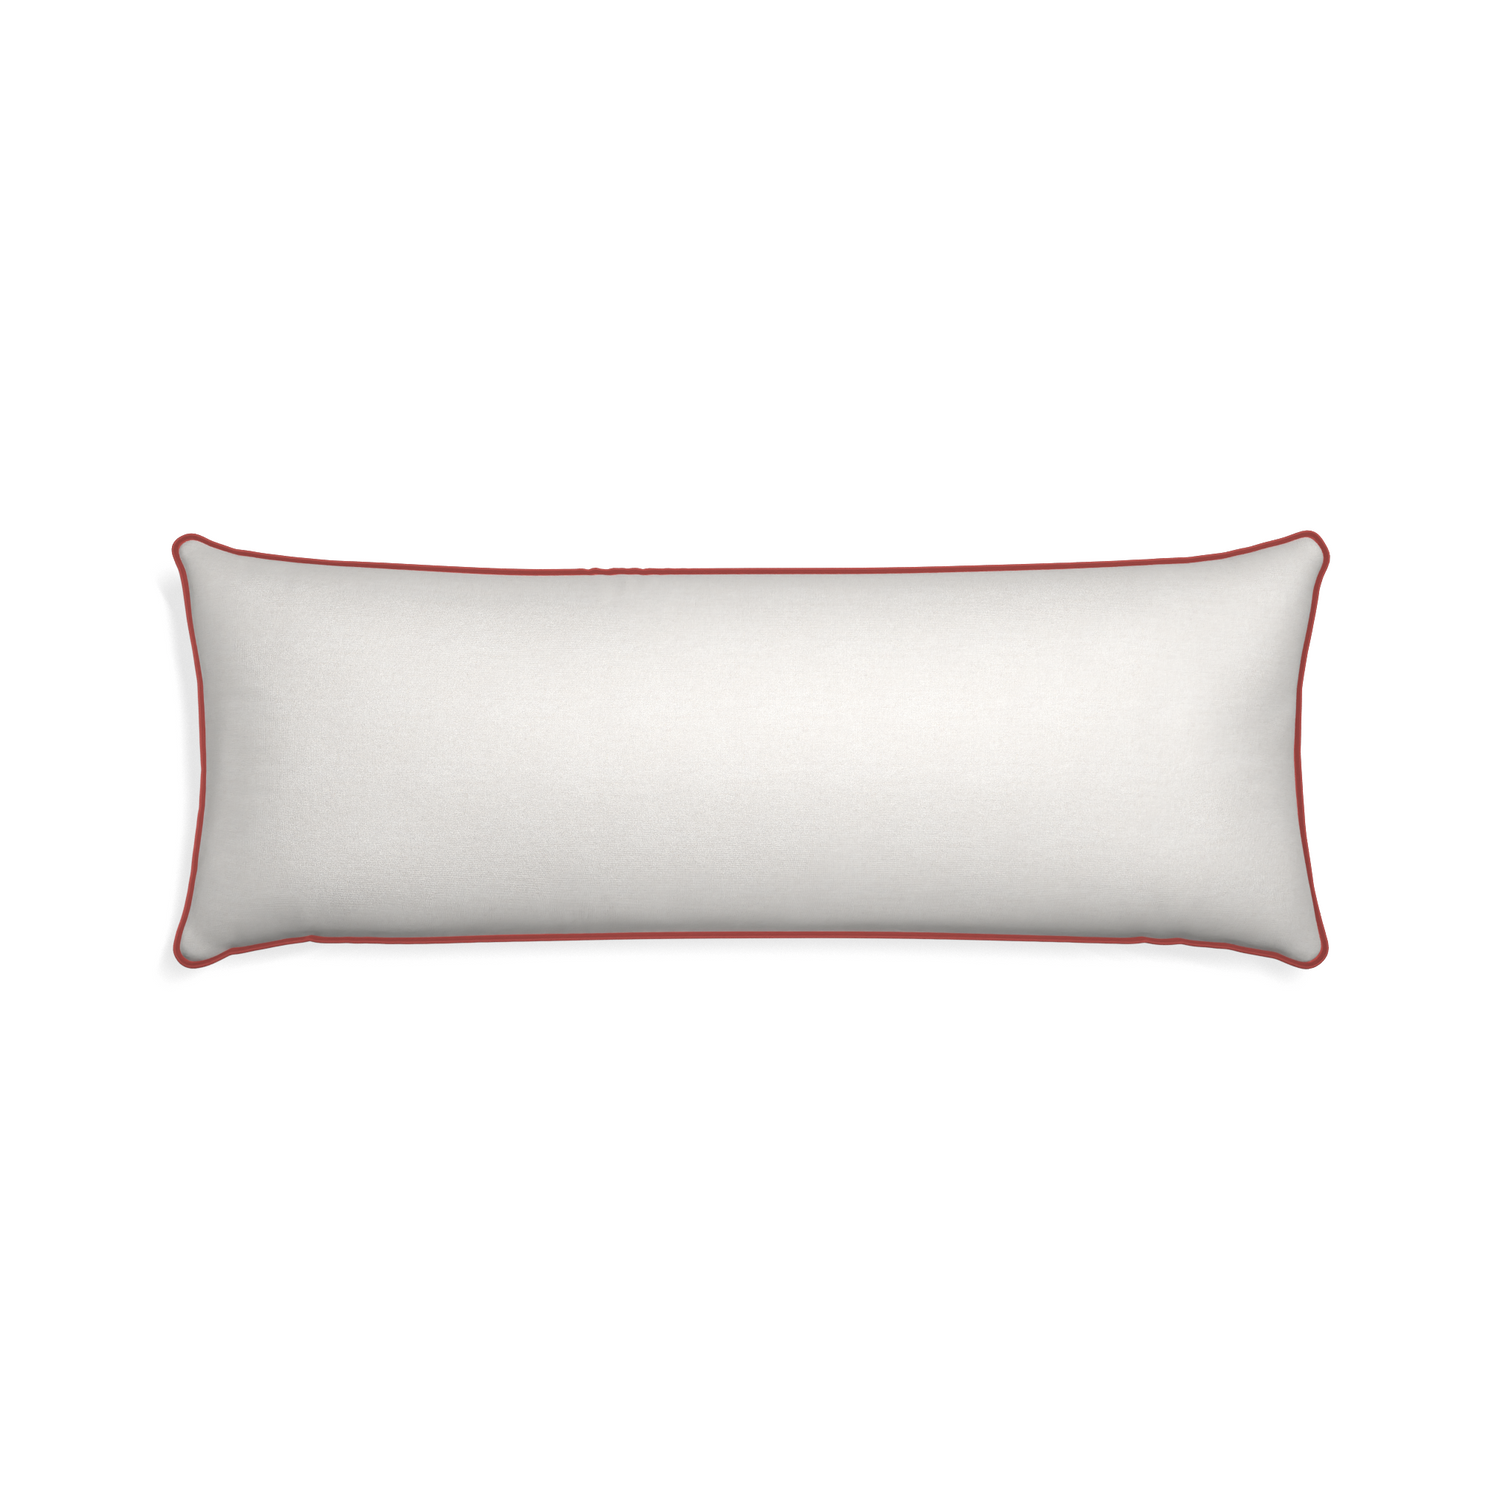 Xl-lumbar flour custom pillow with c piping on white background